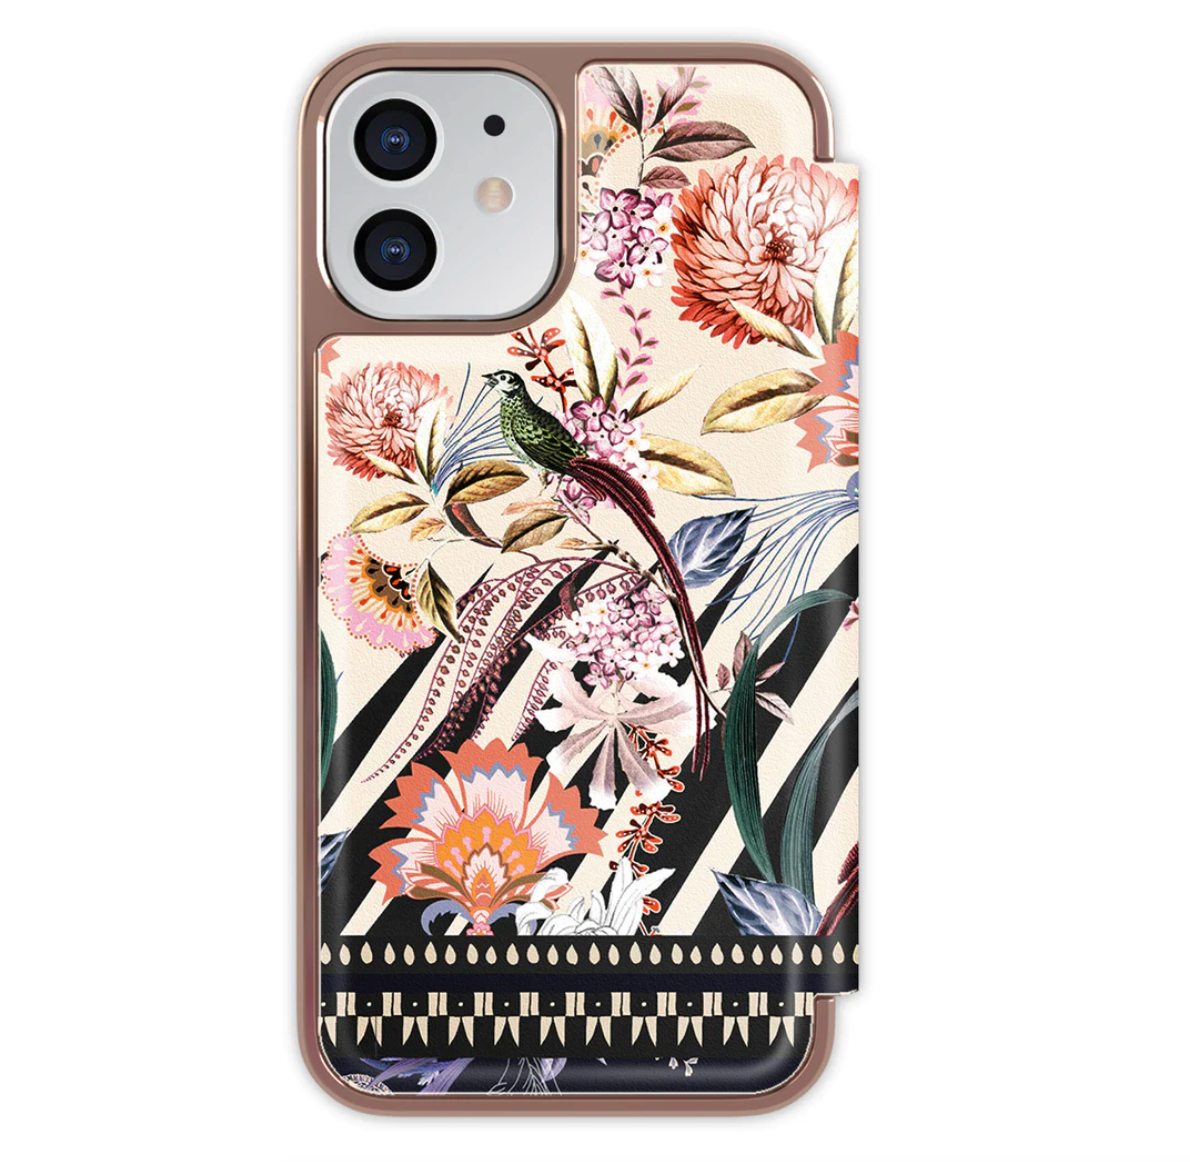 TED BAKER DDECA MIRROR CASE FOR IPHONE 12 - DECADENCE